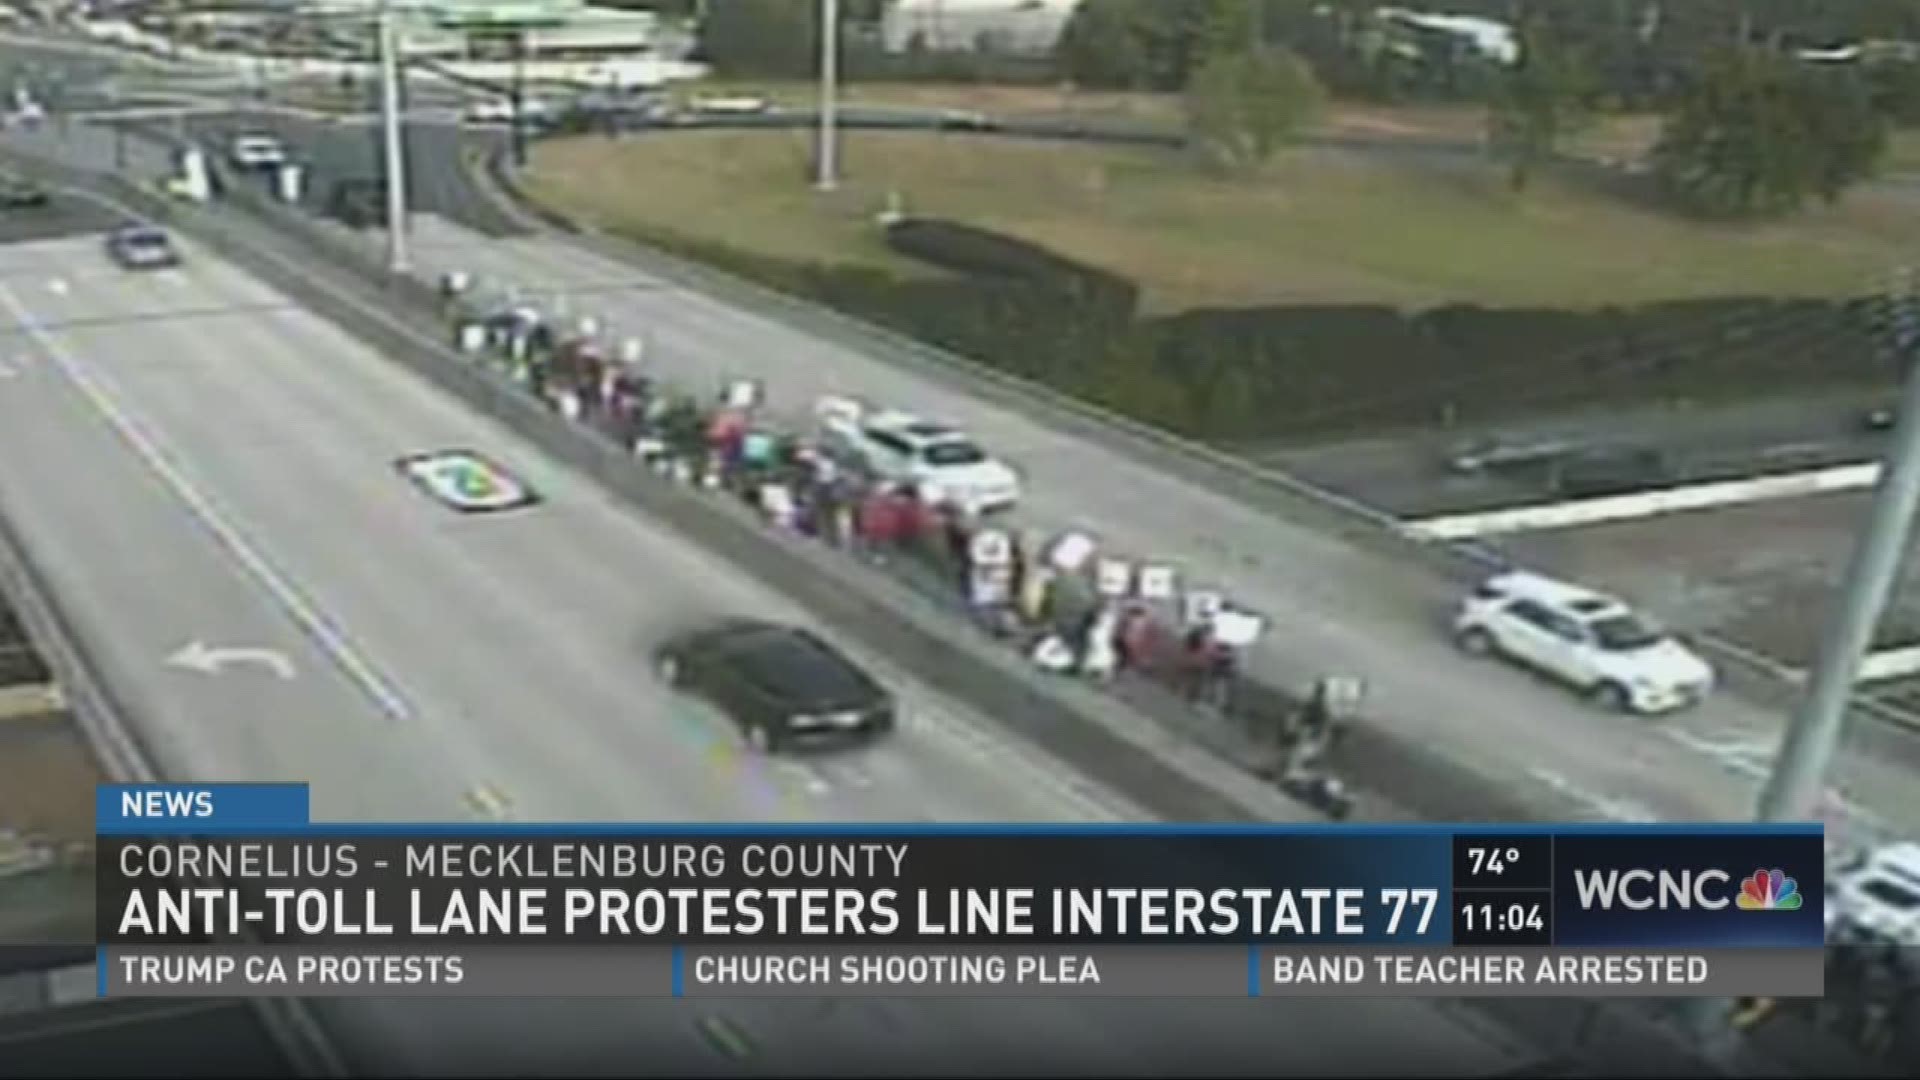 Thousands of drivers were greeted by anti-toll lane protesters during rush hour Friday evening.